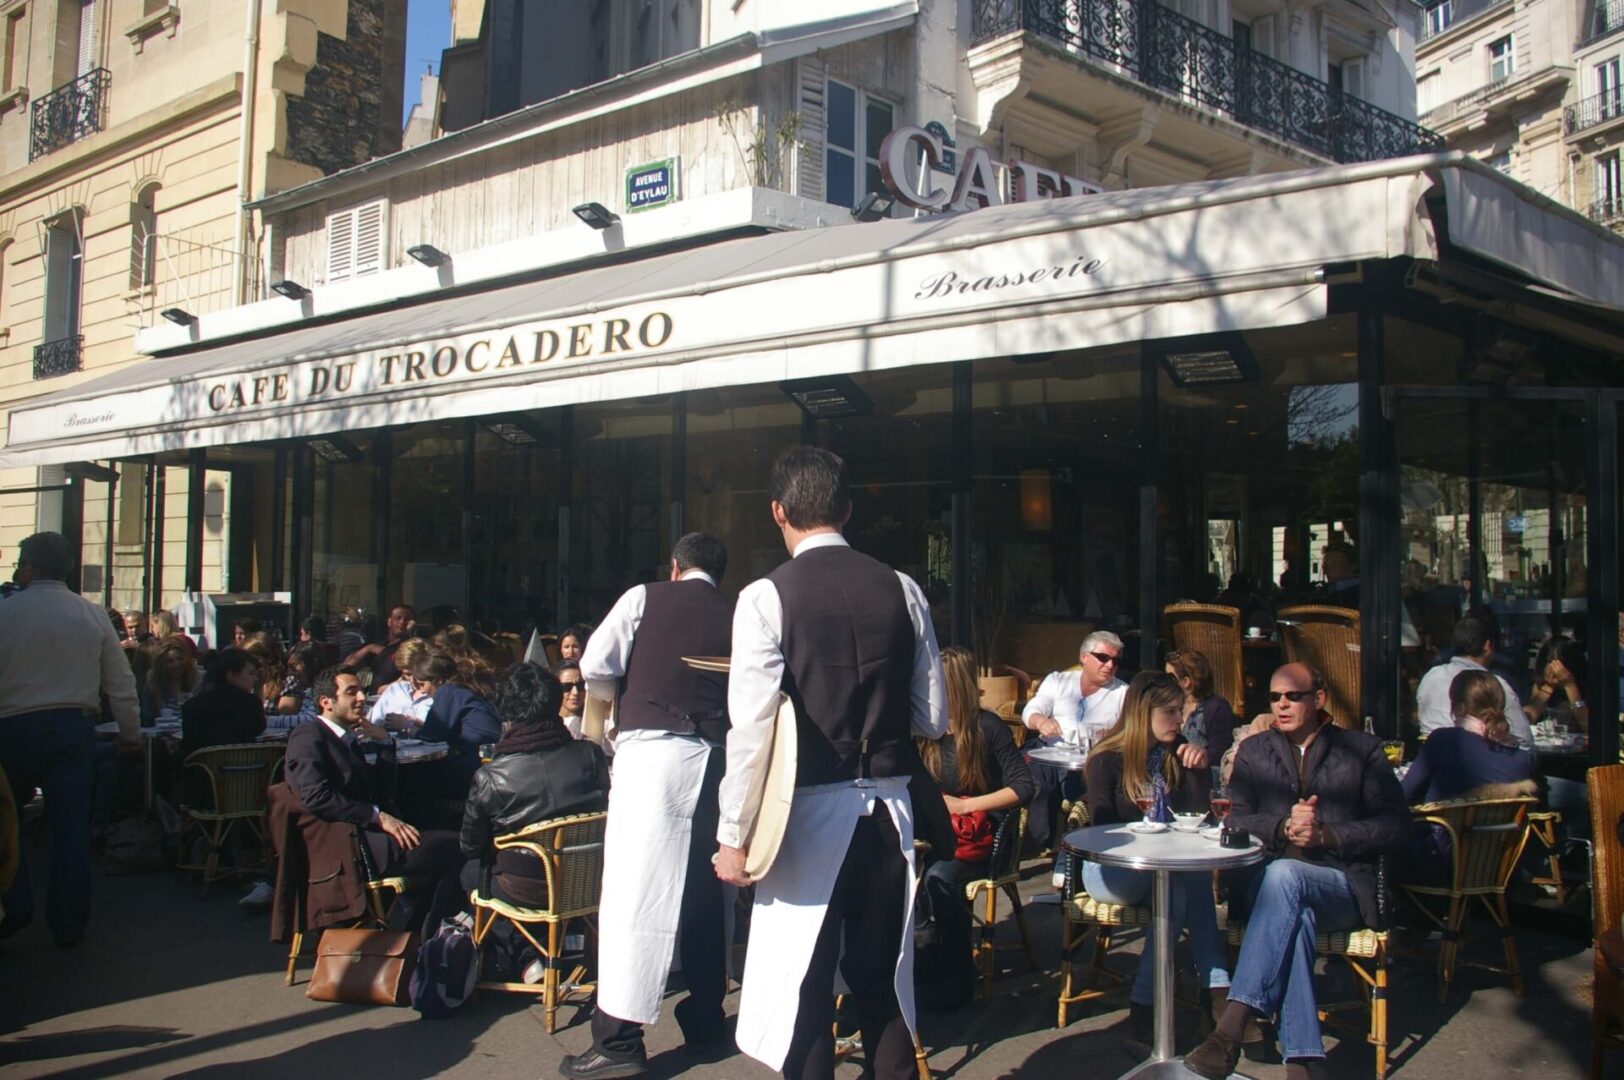 A group of people sitting at tables outside of a restaurant.